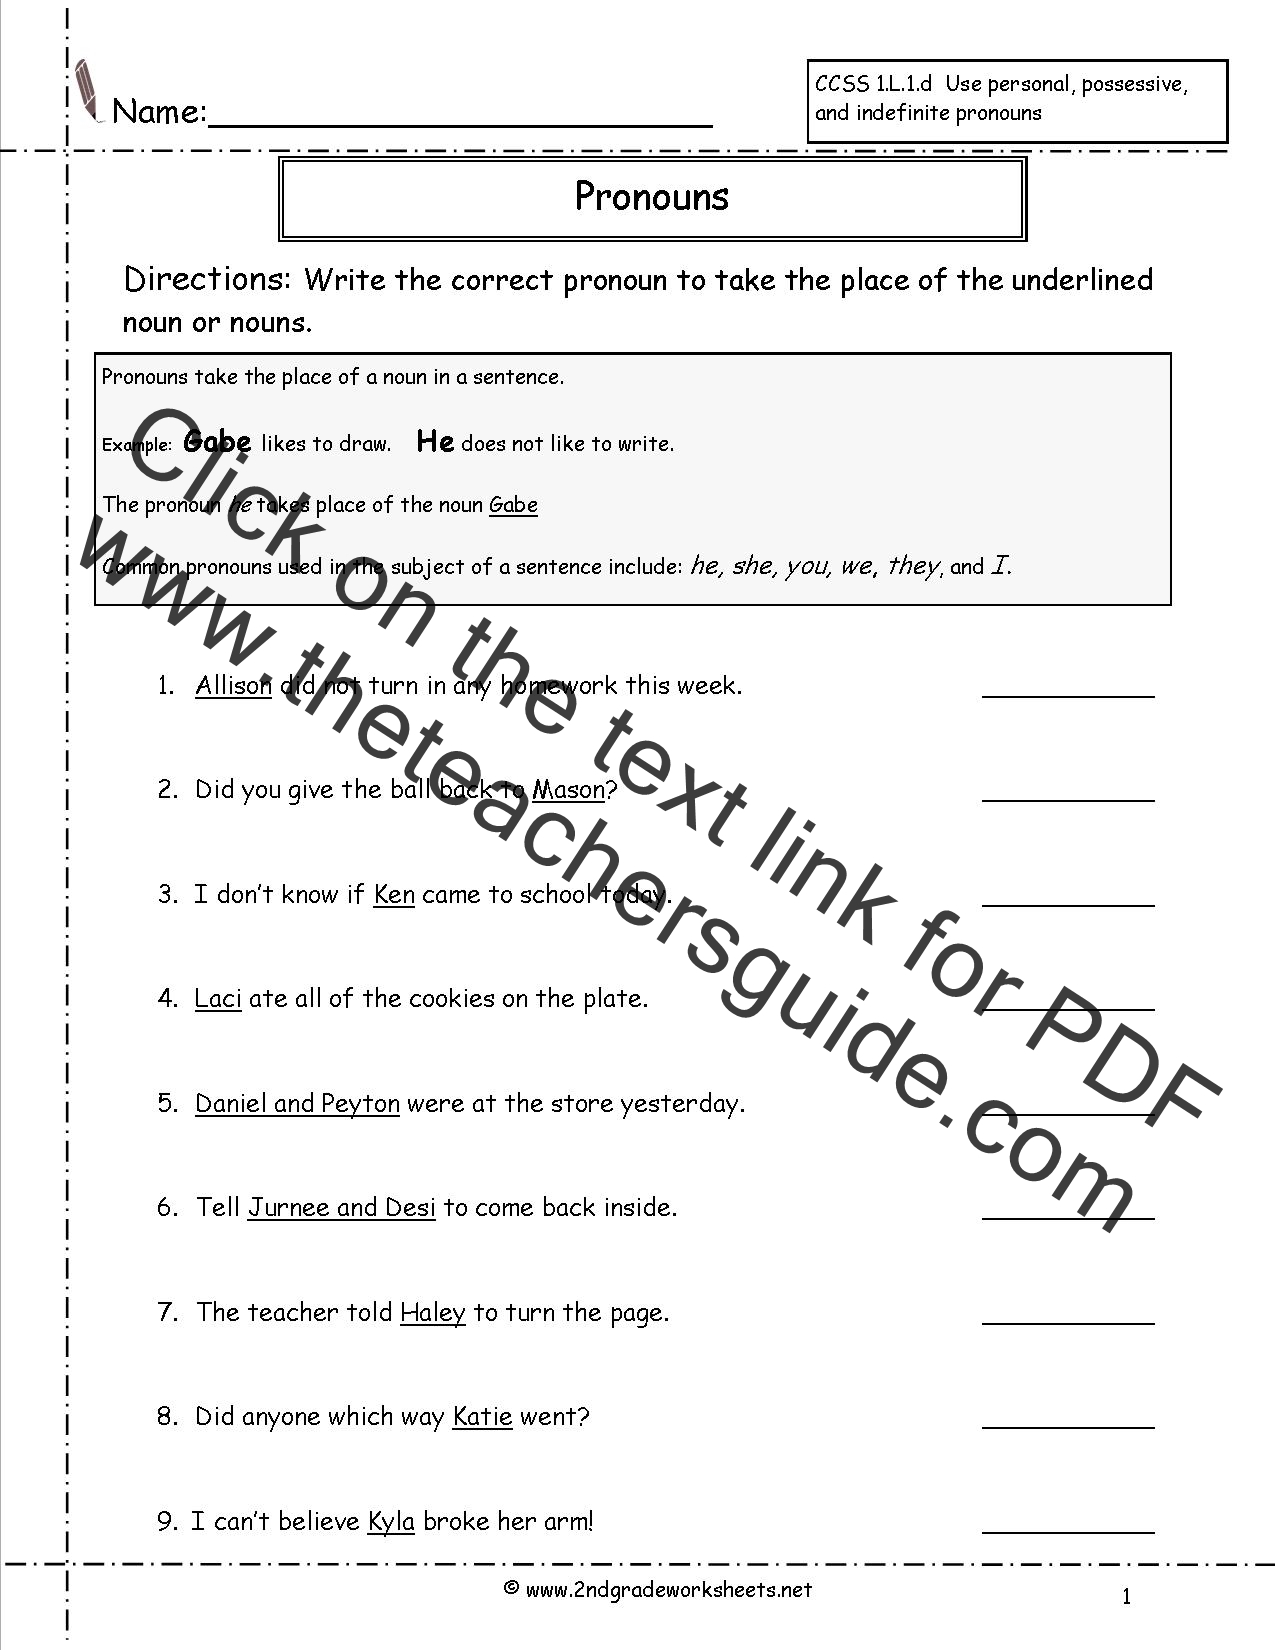 grammar-and-usage-pronouns-worksheet-grade-2-grade-1-worksheets-common-core-aligned-36-pages